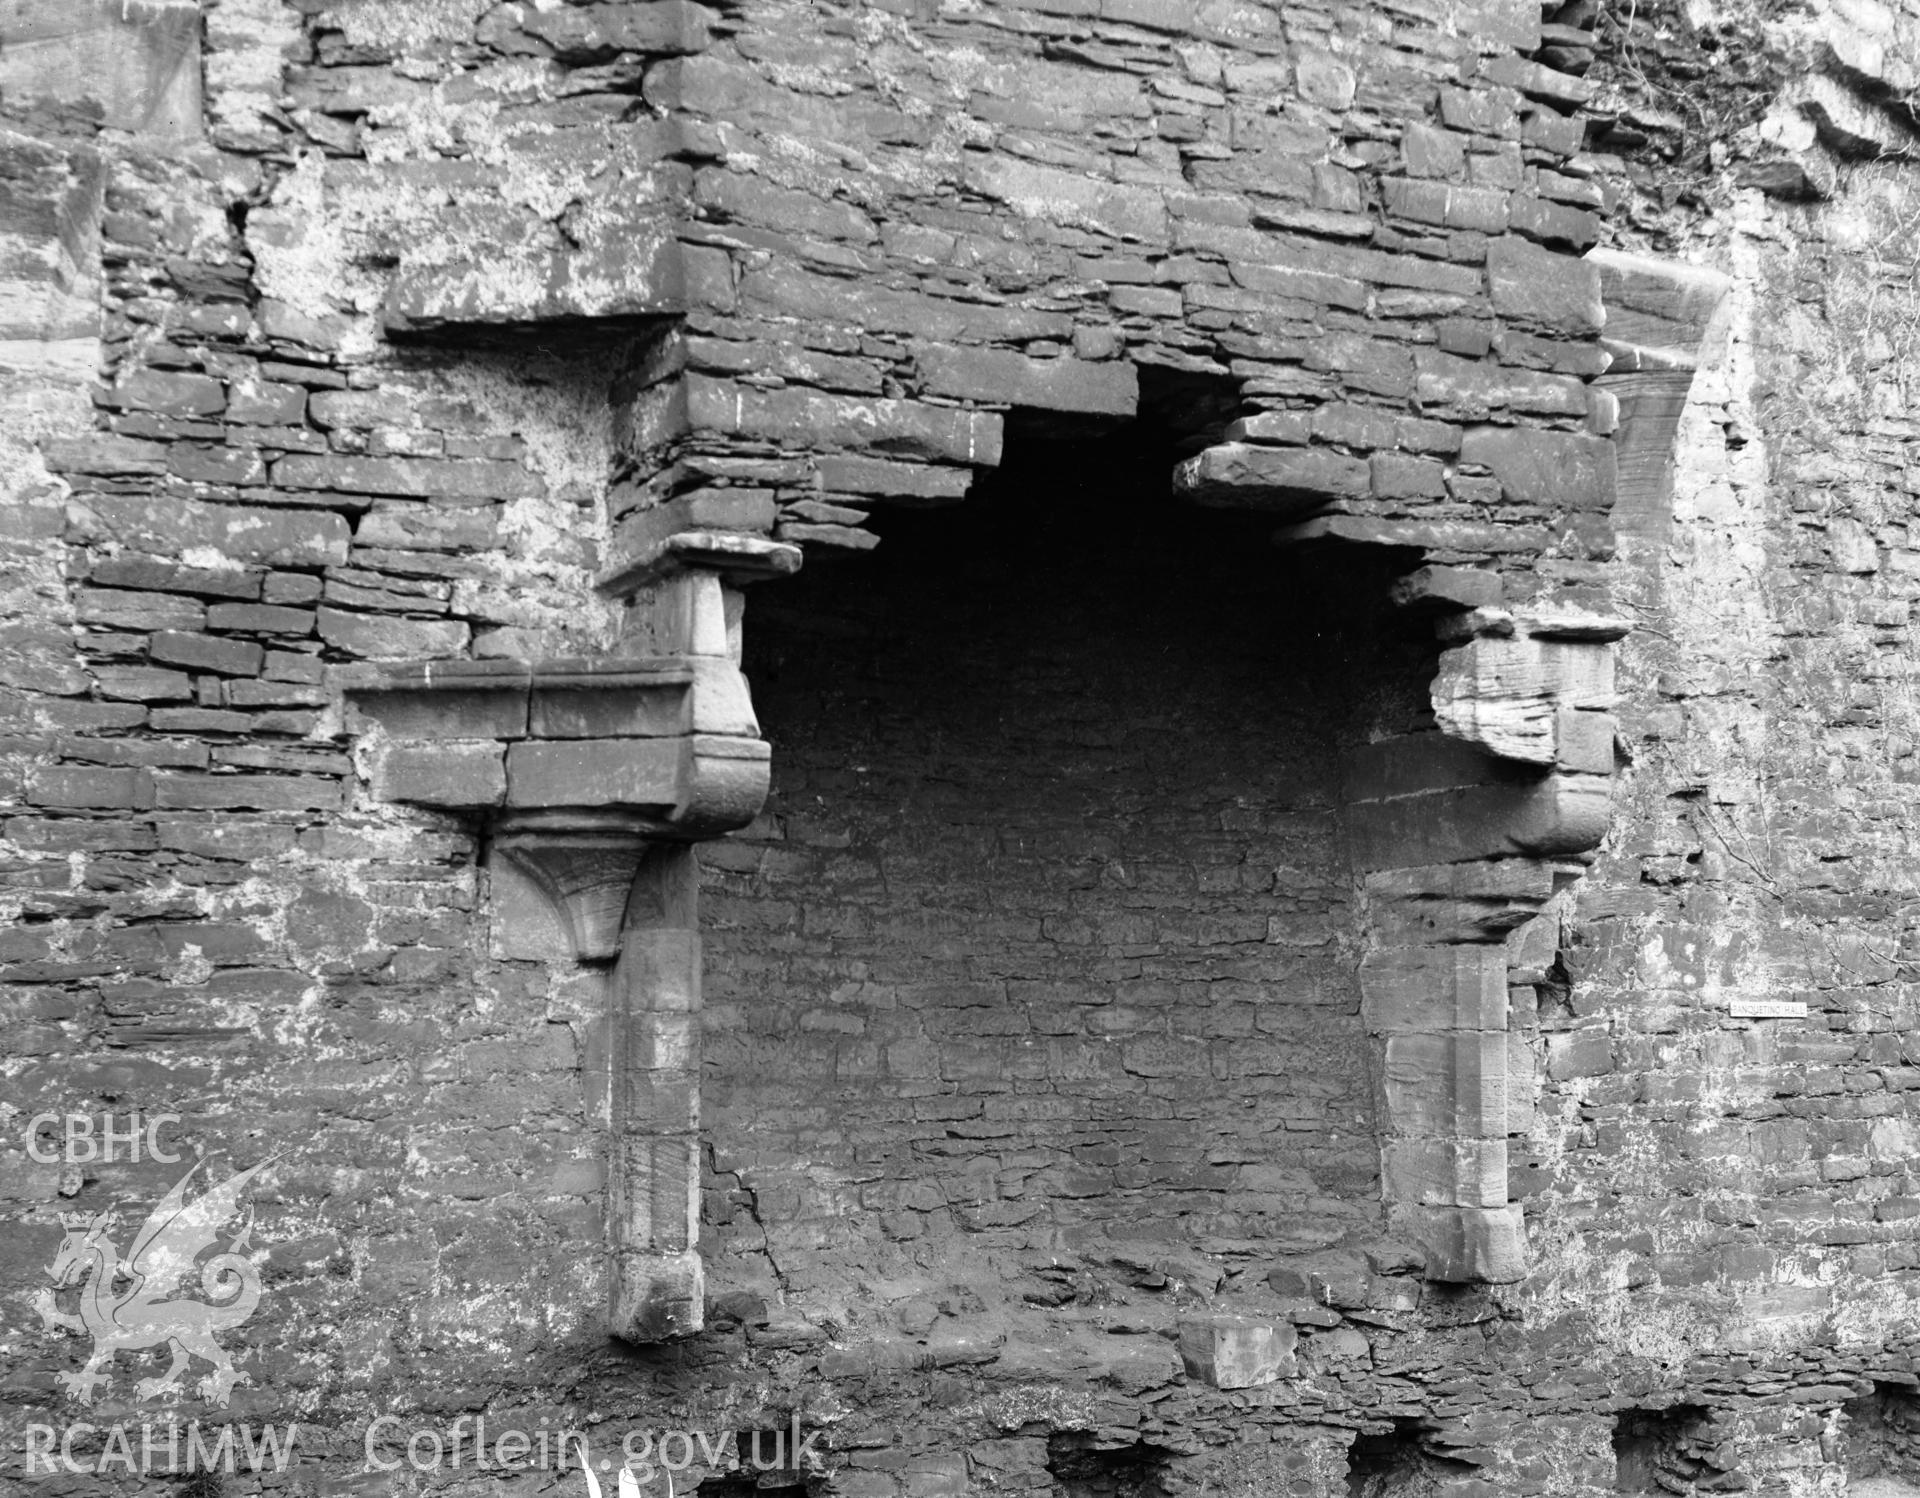 Exterior view of Conwy Castle, taken in 11.01.1952